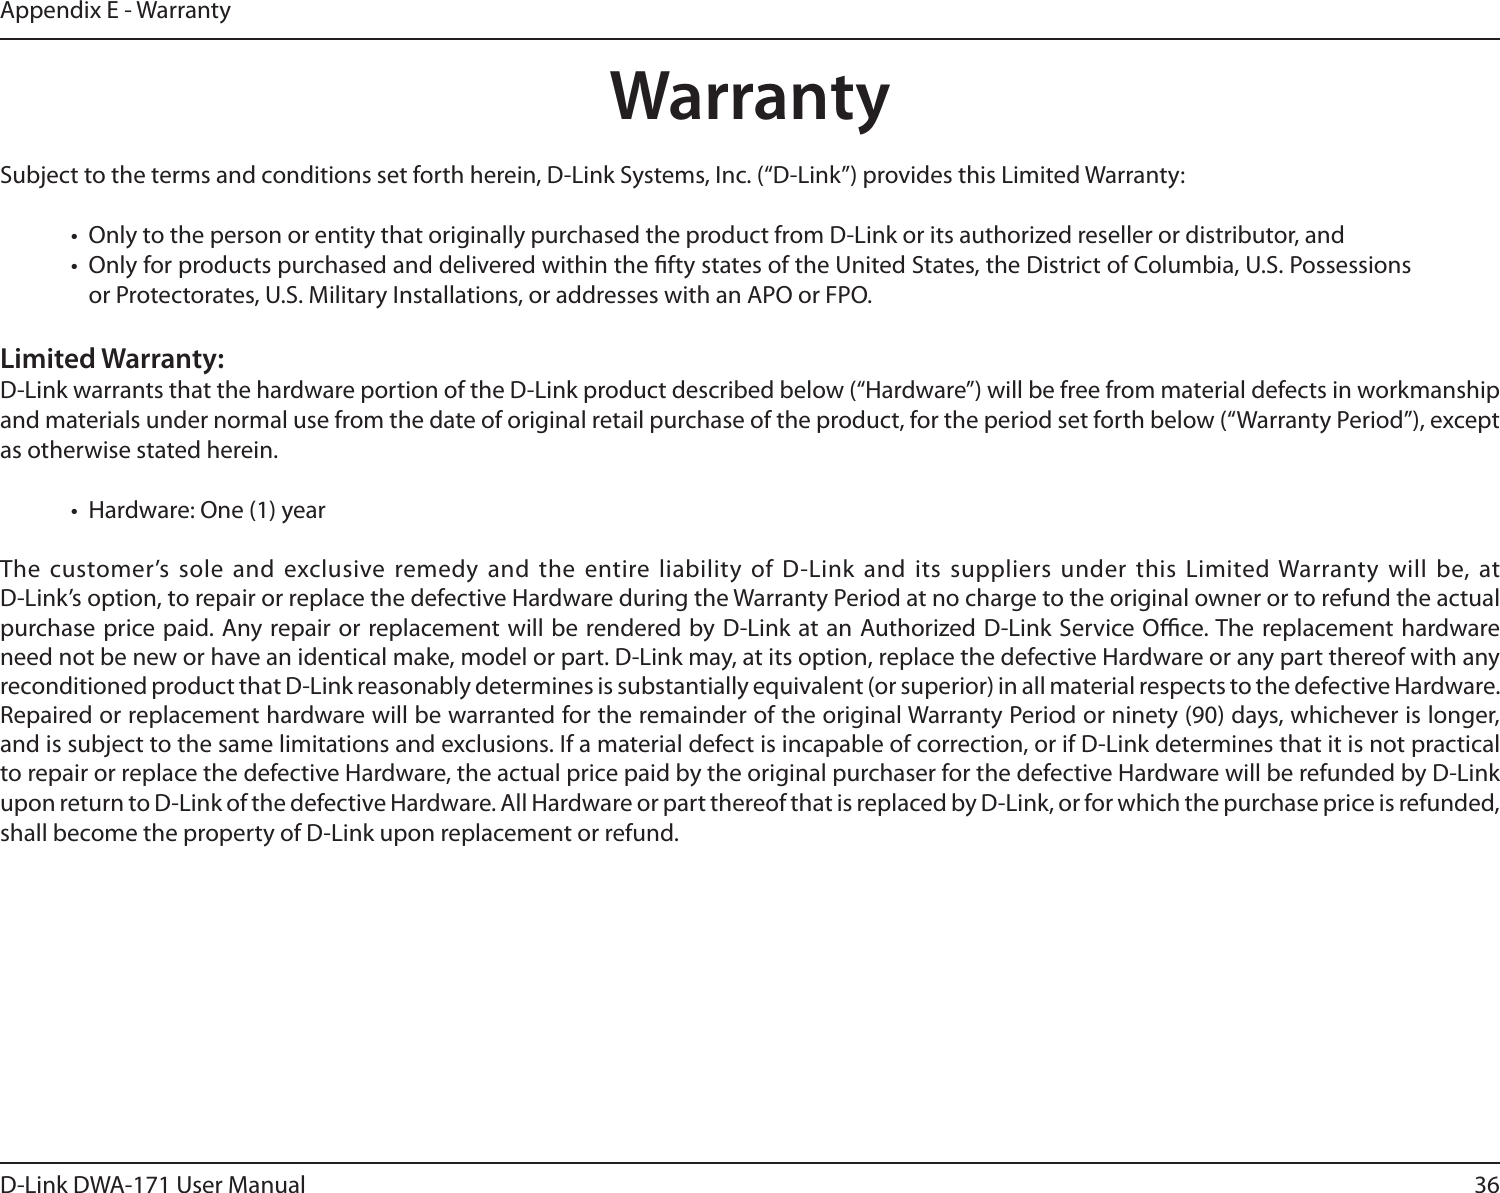 36D-Link DWA-171 User ManualAppendix E - WarrantyWarrantySubject to the terms and conditions set forth herein, D-Link Systems, Inc. (“D-Link”) provides this Limited Warranty:•  Only to the person or entity that originally purchased the product from D-Link or its authorized reseller or distributor, and•  Only for products purchased and delivered within the fty states of the United States, the District of Columbia, U.S. Possessions or Protectorates, U.S. Military Installations, or addresses with an APO or FPO.Limited Warranty:D-Link warrants that the hardware portion of the D-Link product described below (“Hardware”) will be free from material defects in workmanship and materials under normal use from the date of original retail purchase of the product, for the period set forth below (“Warranty Period”), except as otherwise stated herein.•  Hardware: One (1) yearThe customer’s sole and  exclusive  remedy and the entire liability of D-Link and  its suppliers  under this Limited Warranty will be, at  D-Link’s option, to repair or replace the defective Hardware during the Warranty Period at no charge to the original owner or to refund the actual purchase price paid. Any repair or replacement will be rendered by D-Link at an Authorized D-Link Service Oce. The replacement hardware need not be new or have an identical make, model or part. D-Link may, at its option, replace the defective Hardware or any part thereof with any reconditioned product that D-Link reasonably determines is substantially equivalent (or superior) in all material respects to the defective Hardware. Repaired or replacement hardware will be warranted for the remainder of the original Warranty Period or ninety (90) days, whichever is longer, and is subject to the same limitations and exclusions. If a material defect is incapable of correction, or if D-Link determines that it is not practical to repair or replace the defective Hardware, the actual price paid by the original purchaser for the defective Hardware will be refunded by D-Link upon return to D-Link of the defective Hardware. All Hardware or part thereof that is replaced by D-Link, or for which the purchase price is refunded, shall become the property of D-Link upon replacement or refund.